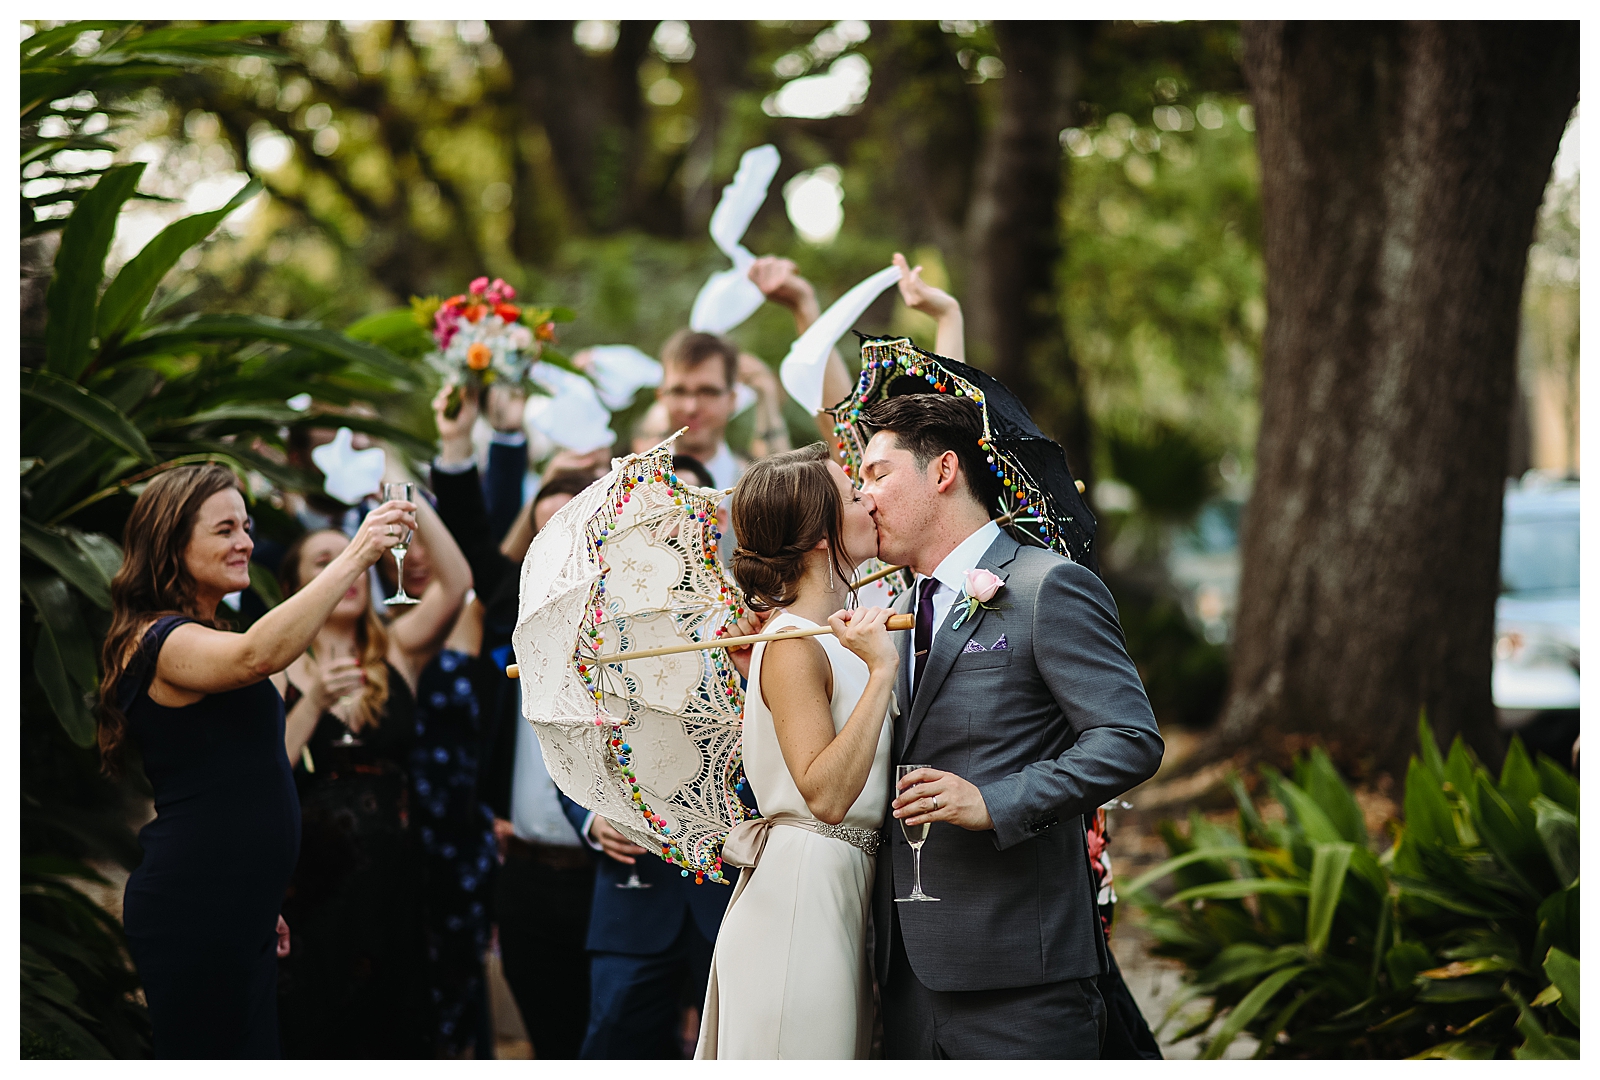 A couple holds decorated wedding umbrellas for a wedding parade in New Orleans.